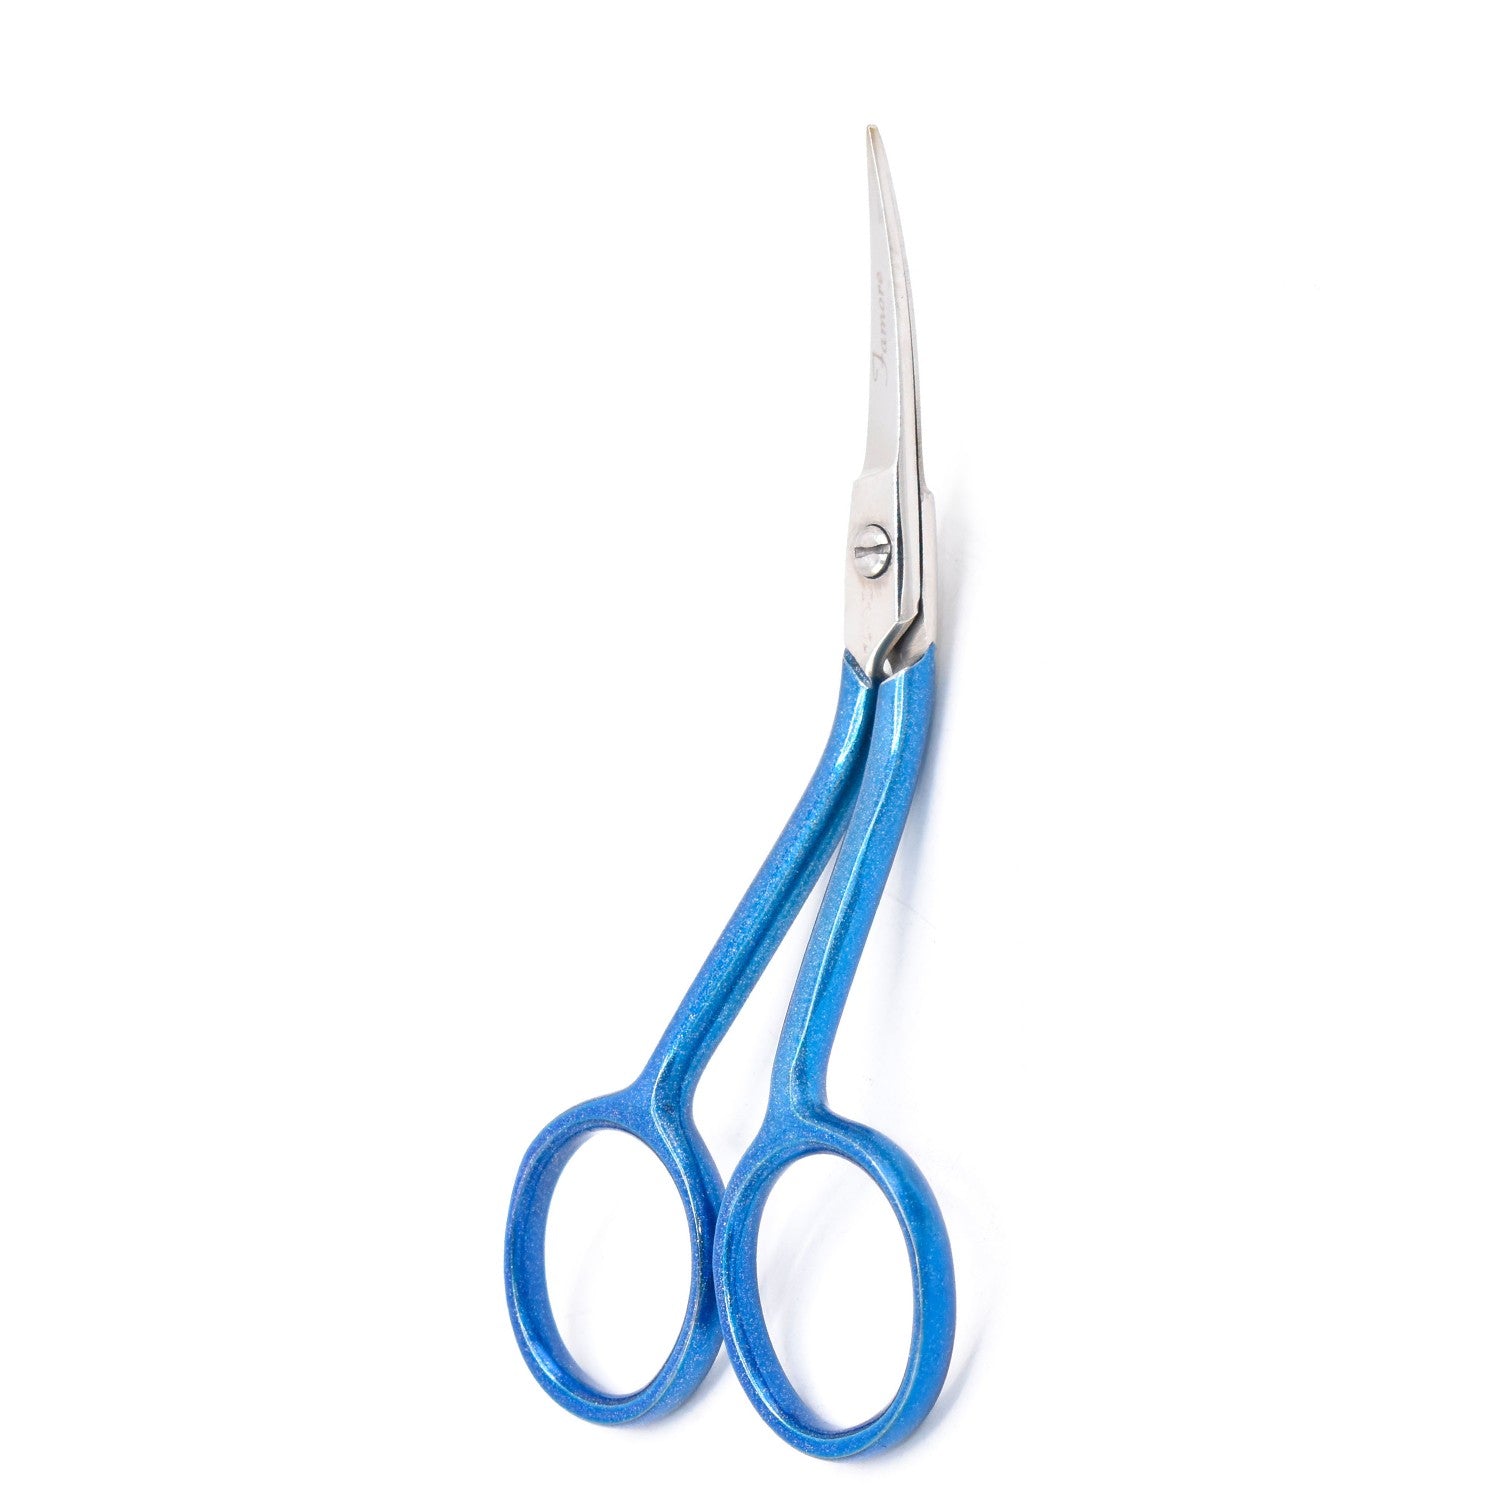 True Left Handed 4-Inch Mini Double Curved Embroidery Scissors from Famore Cutlery